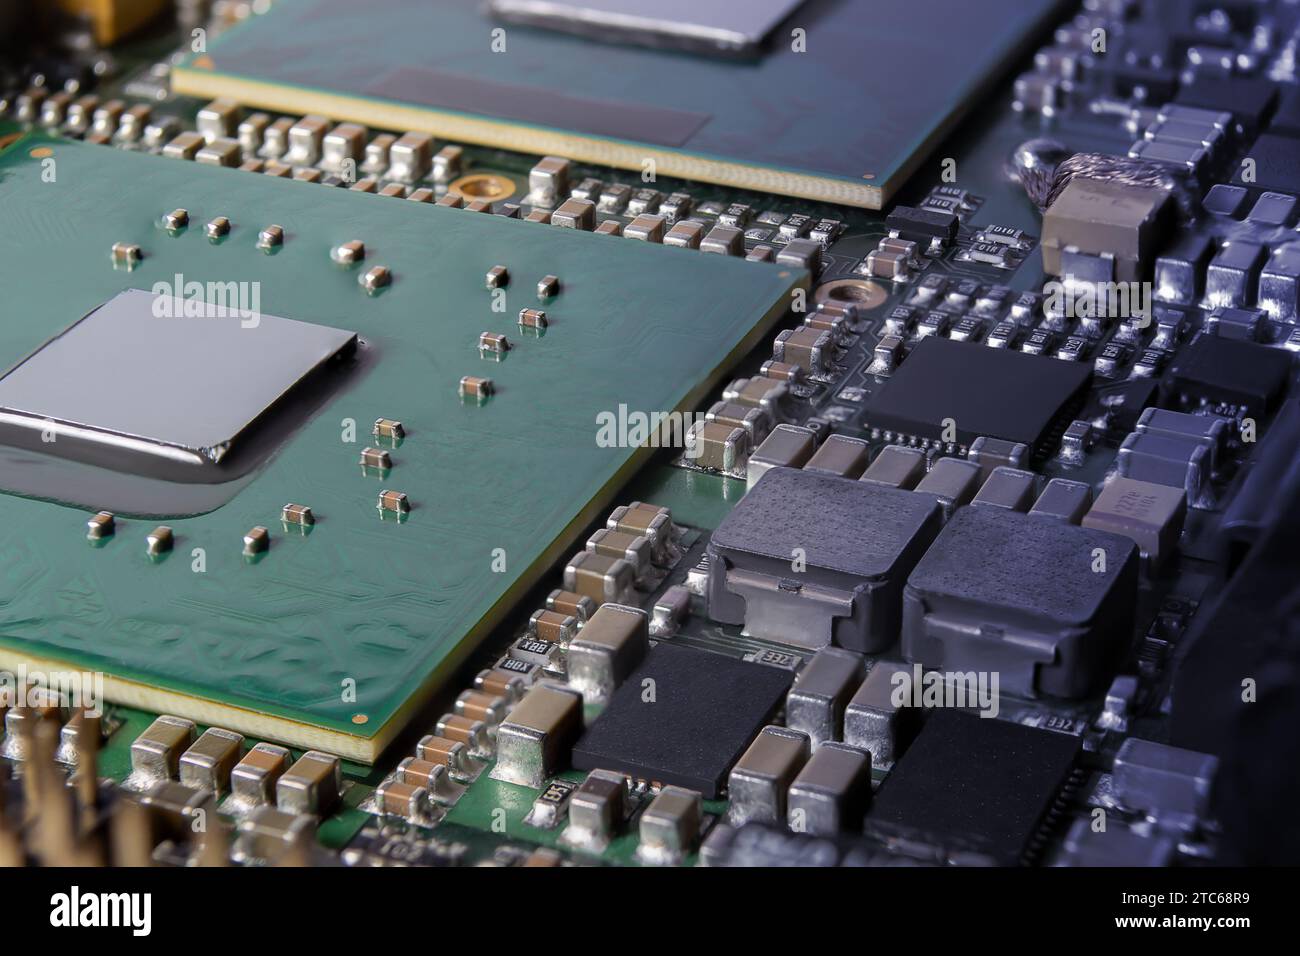 Modern electronic circuit board with processor, integrated circuits and surface mounted passive components close up. Technology background Stock Photo